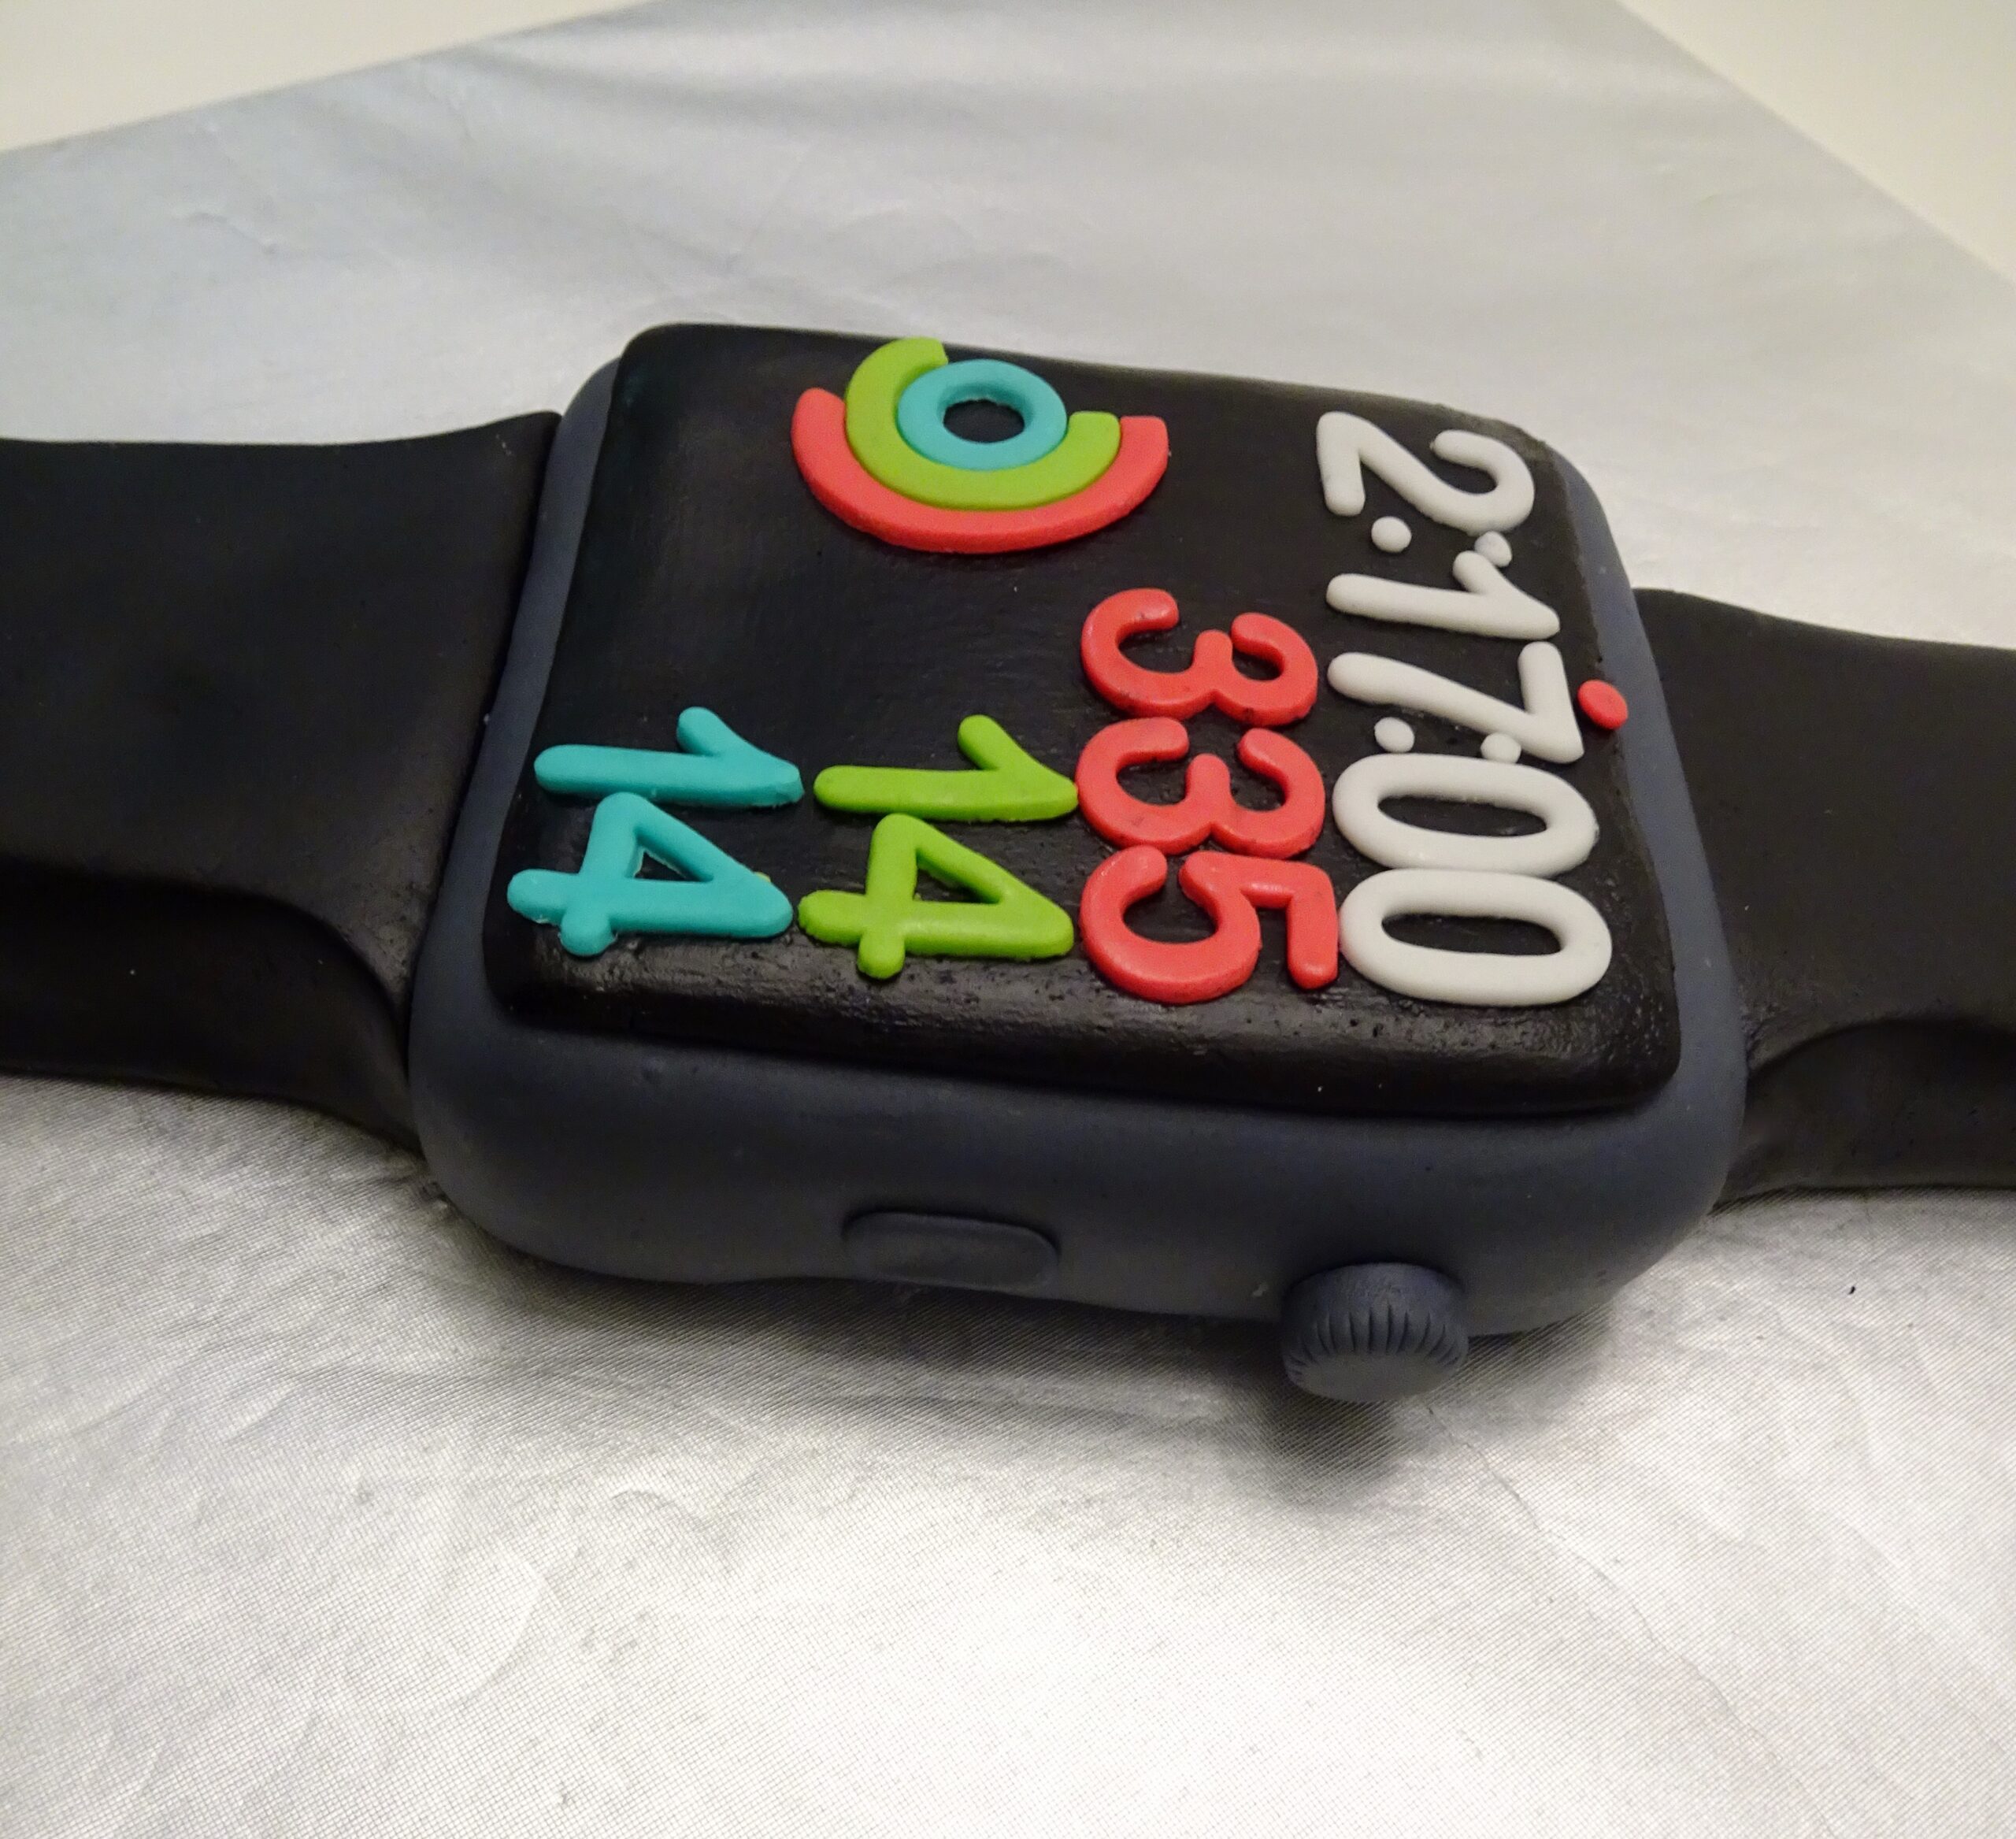 How to Make an Apple Watch Cake